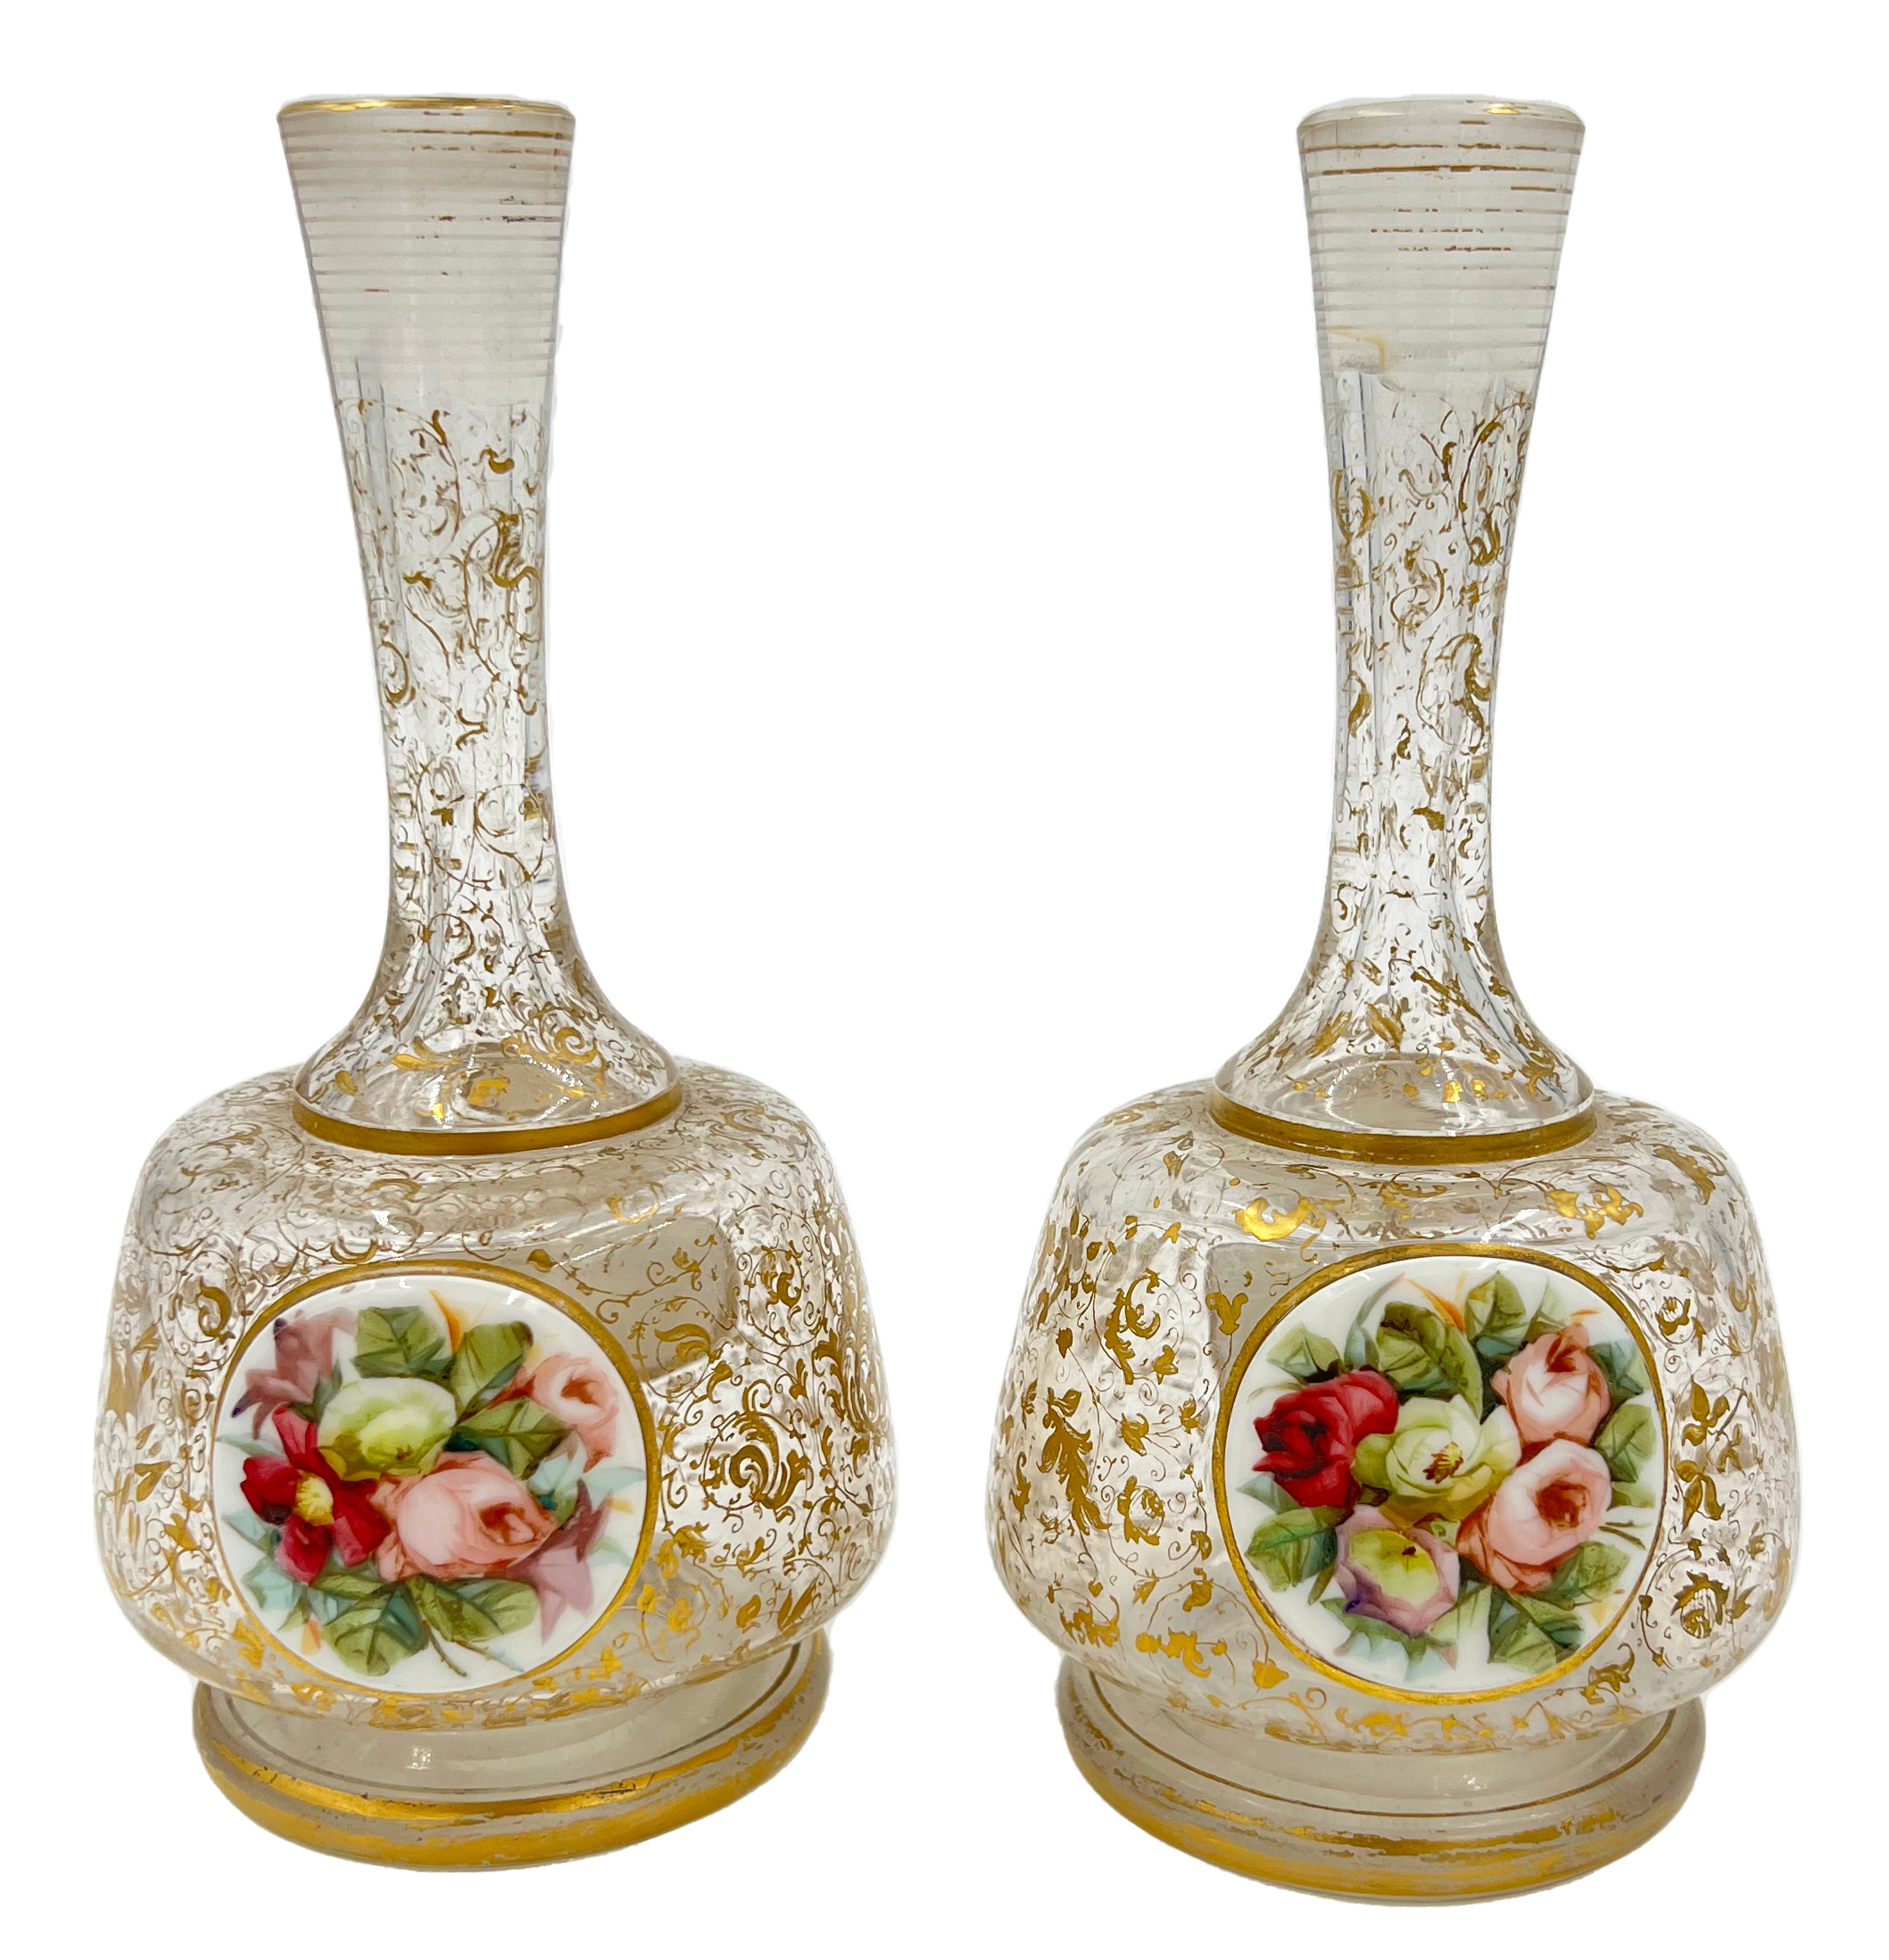 PAIR OF 19TH CENTURY CLEAR BOHEMIAN GLASS VASES - Image 3 of 3